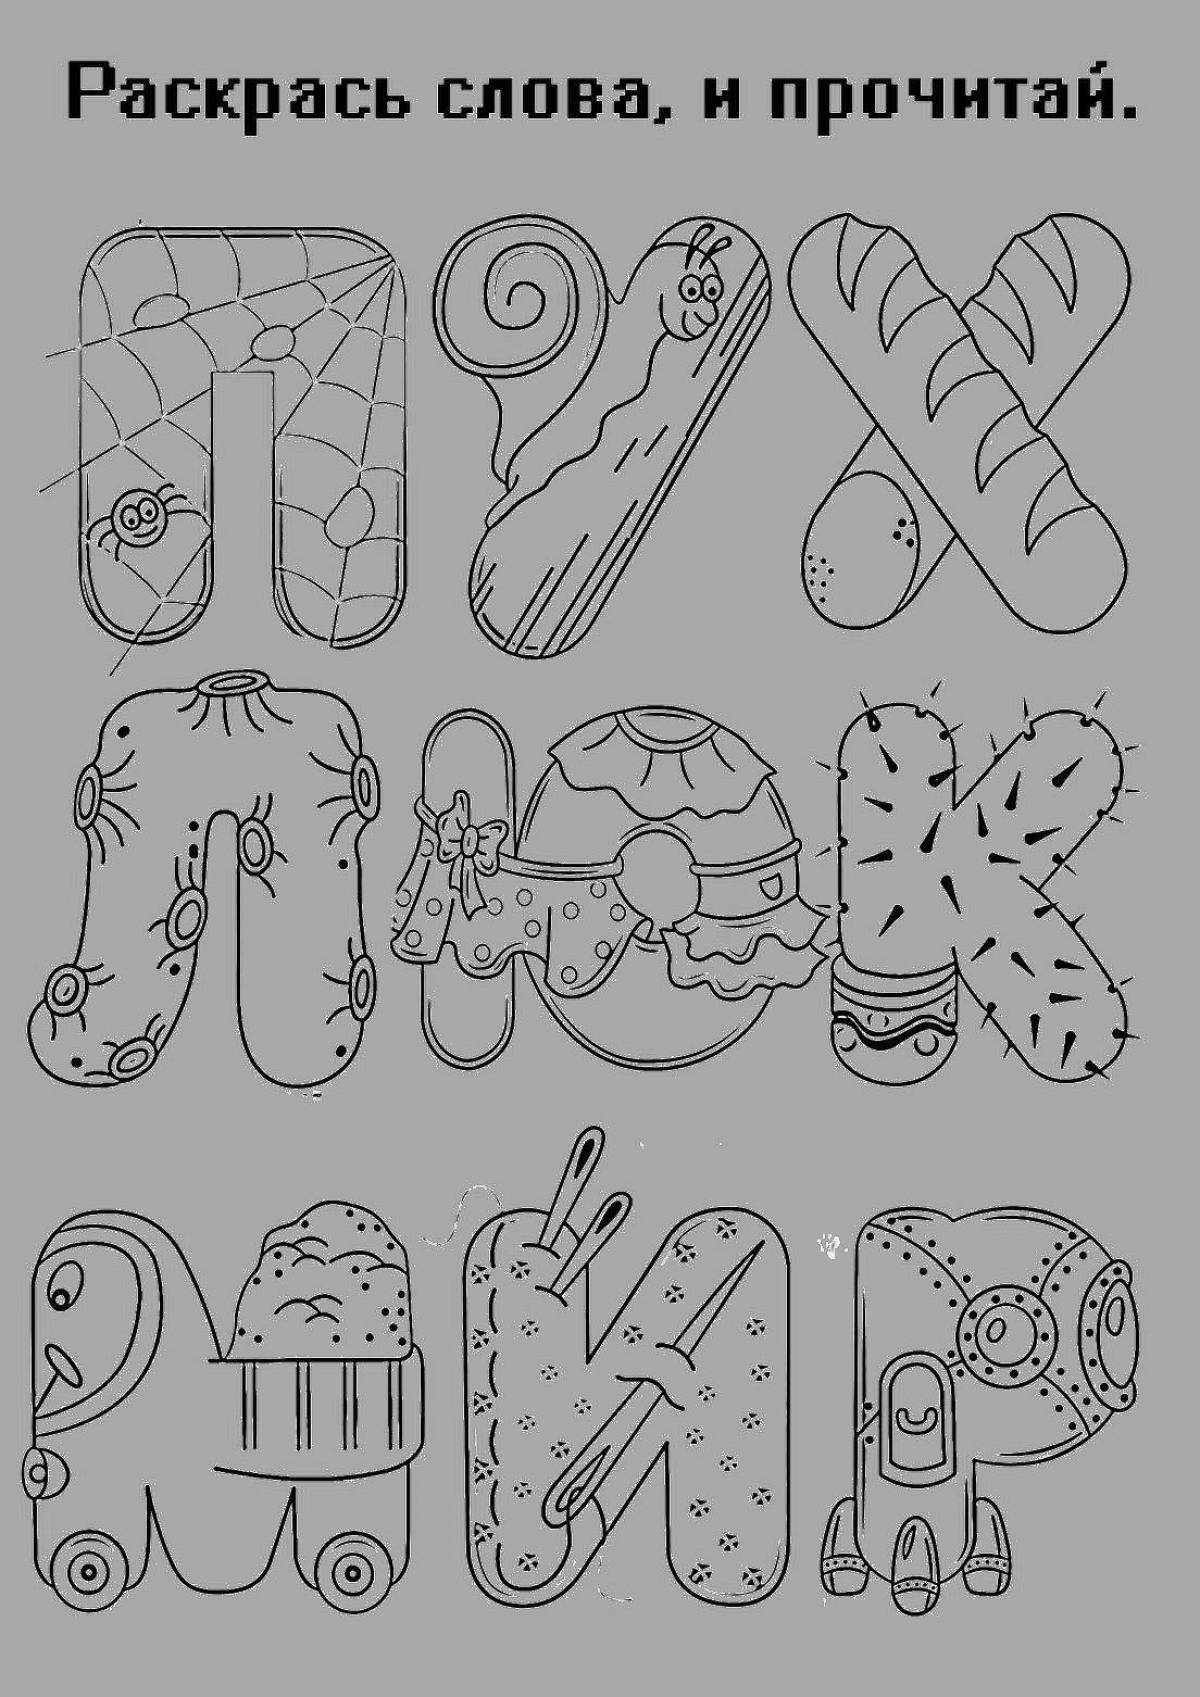 Exquisite text coloring page